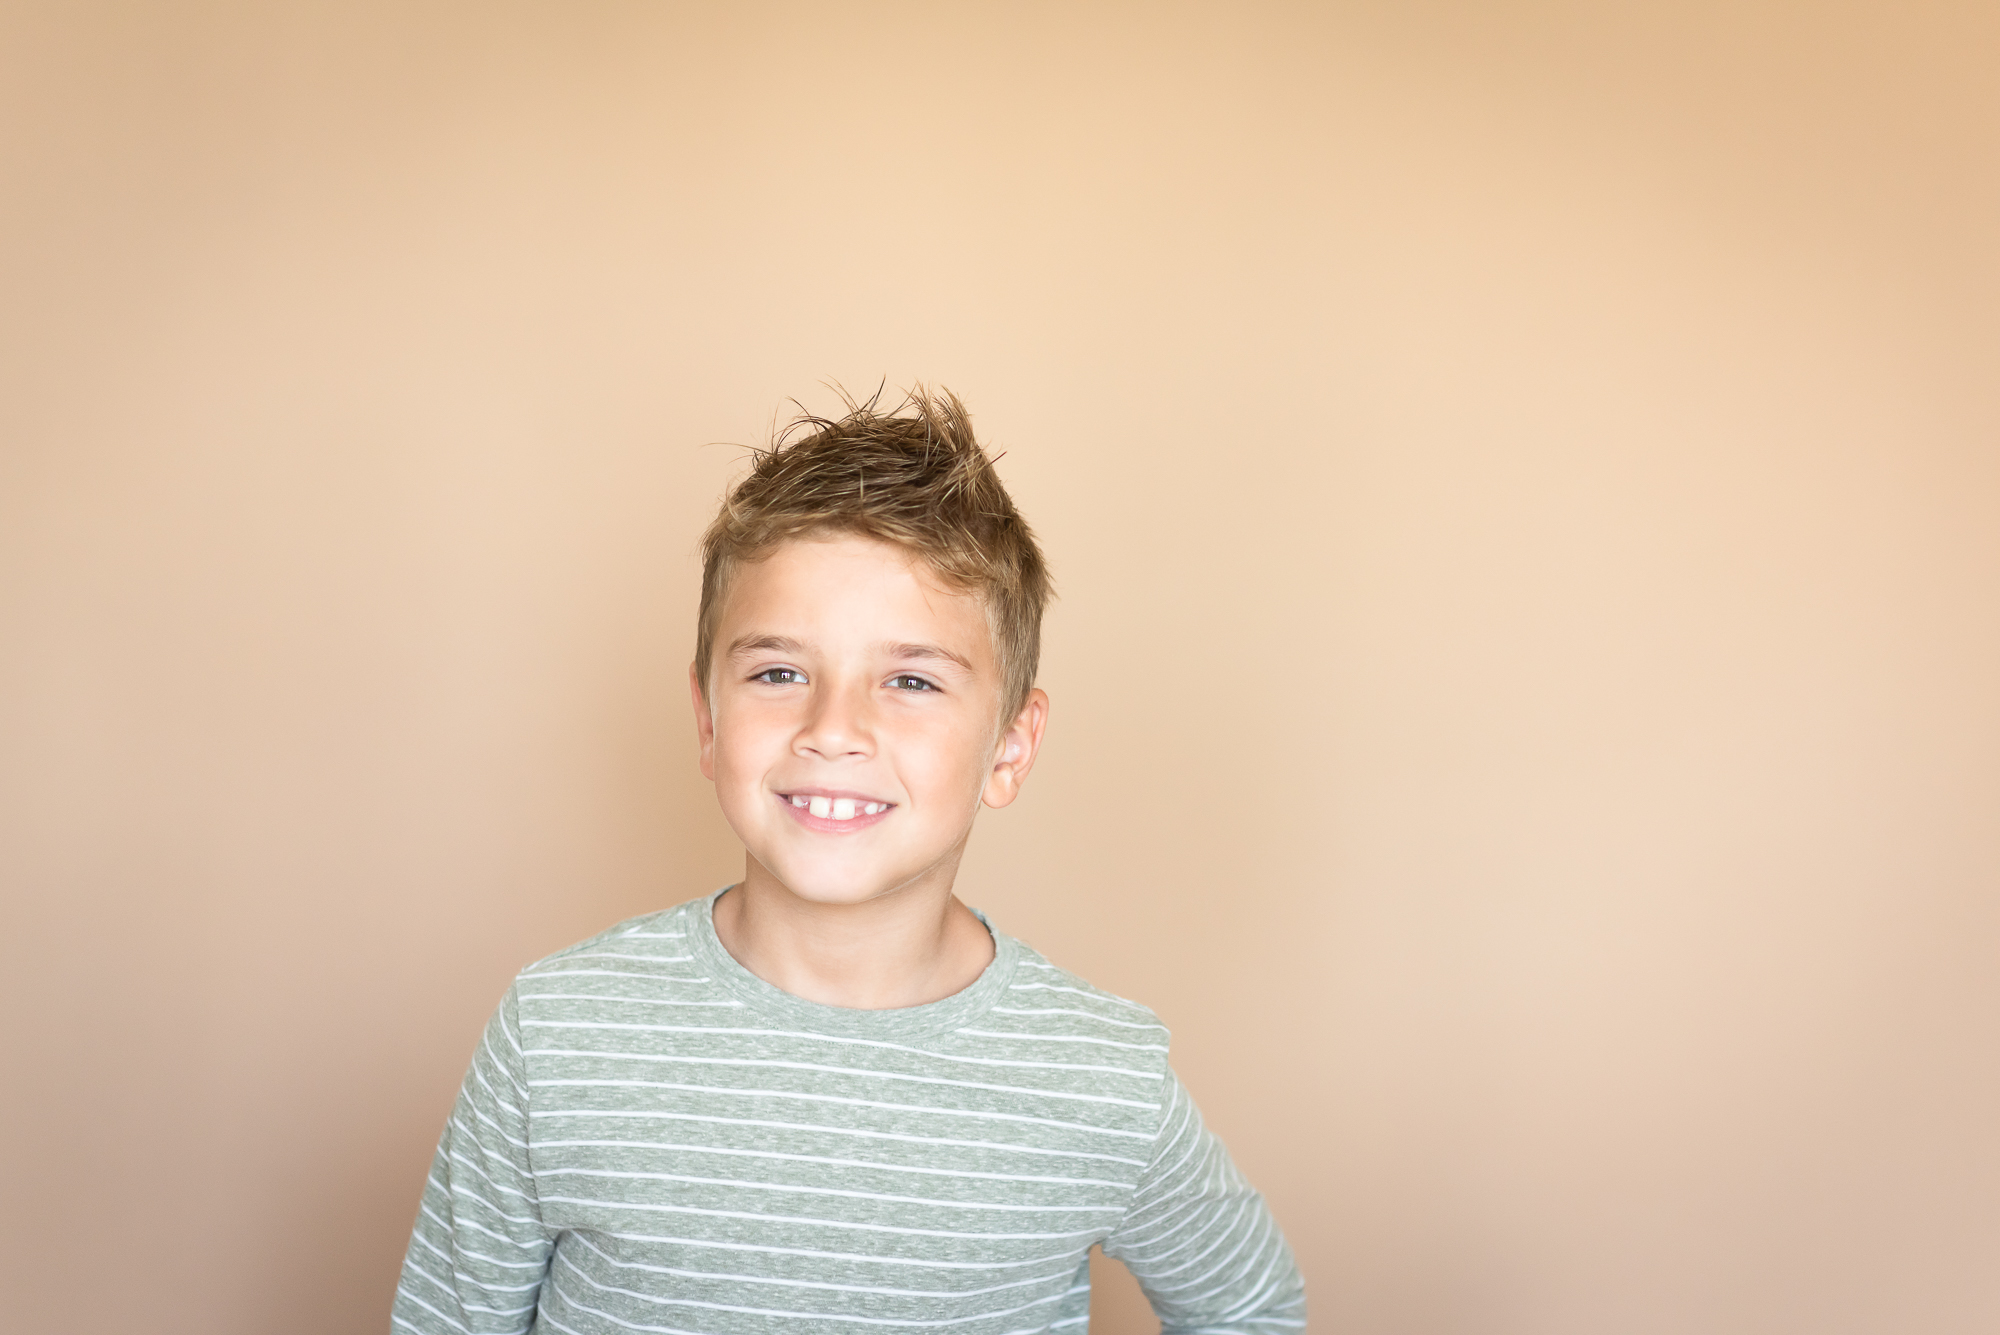 boy in a sage and white striped shirt studio portrait against a tan background showing personality